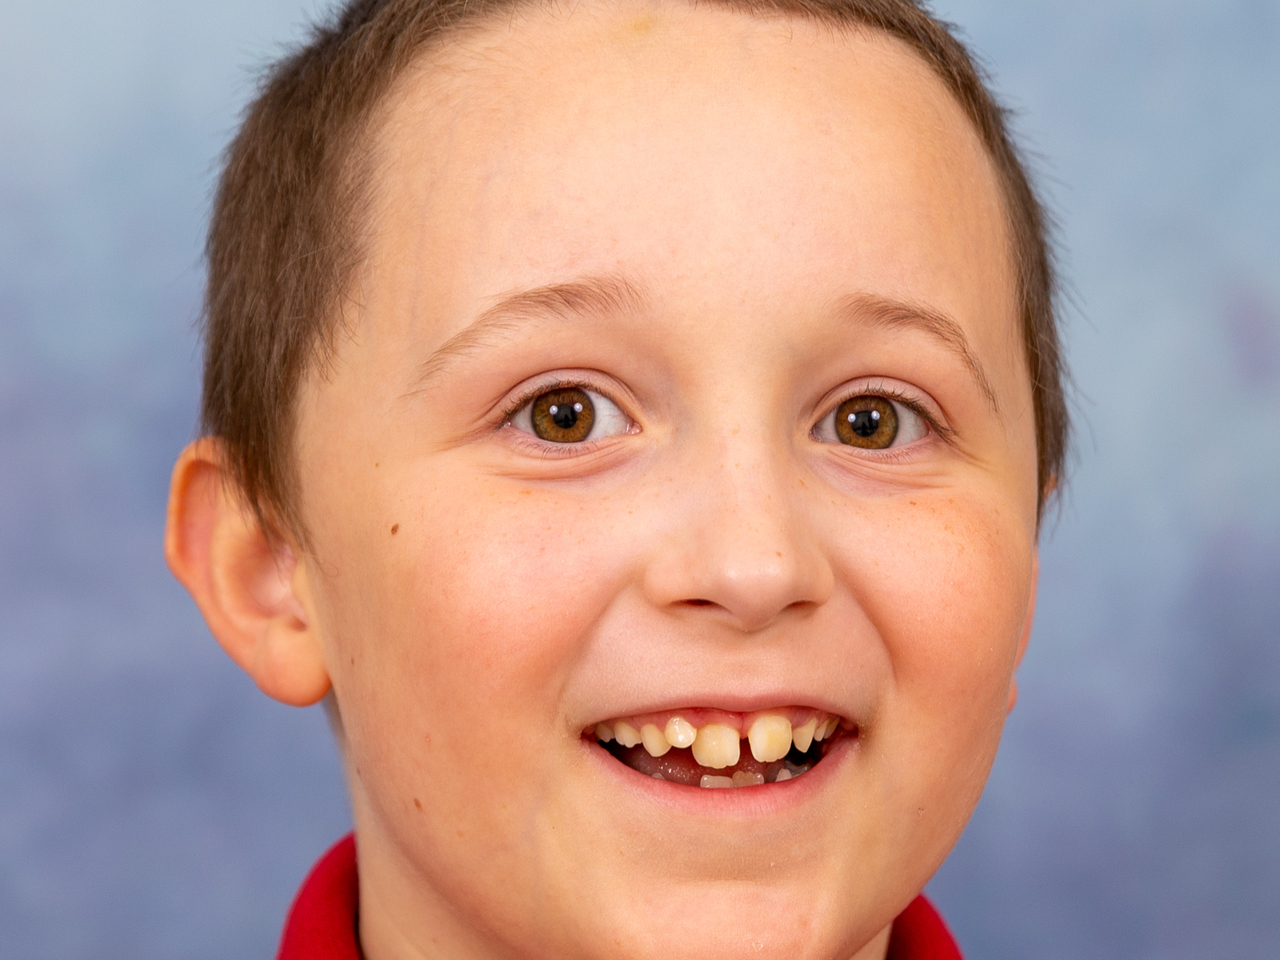 Natural and organic special needs photograph at school in Swindon